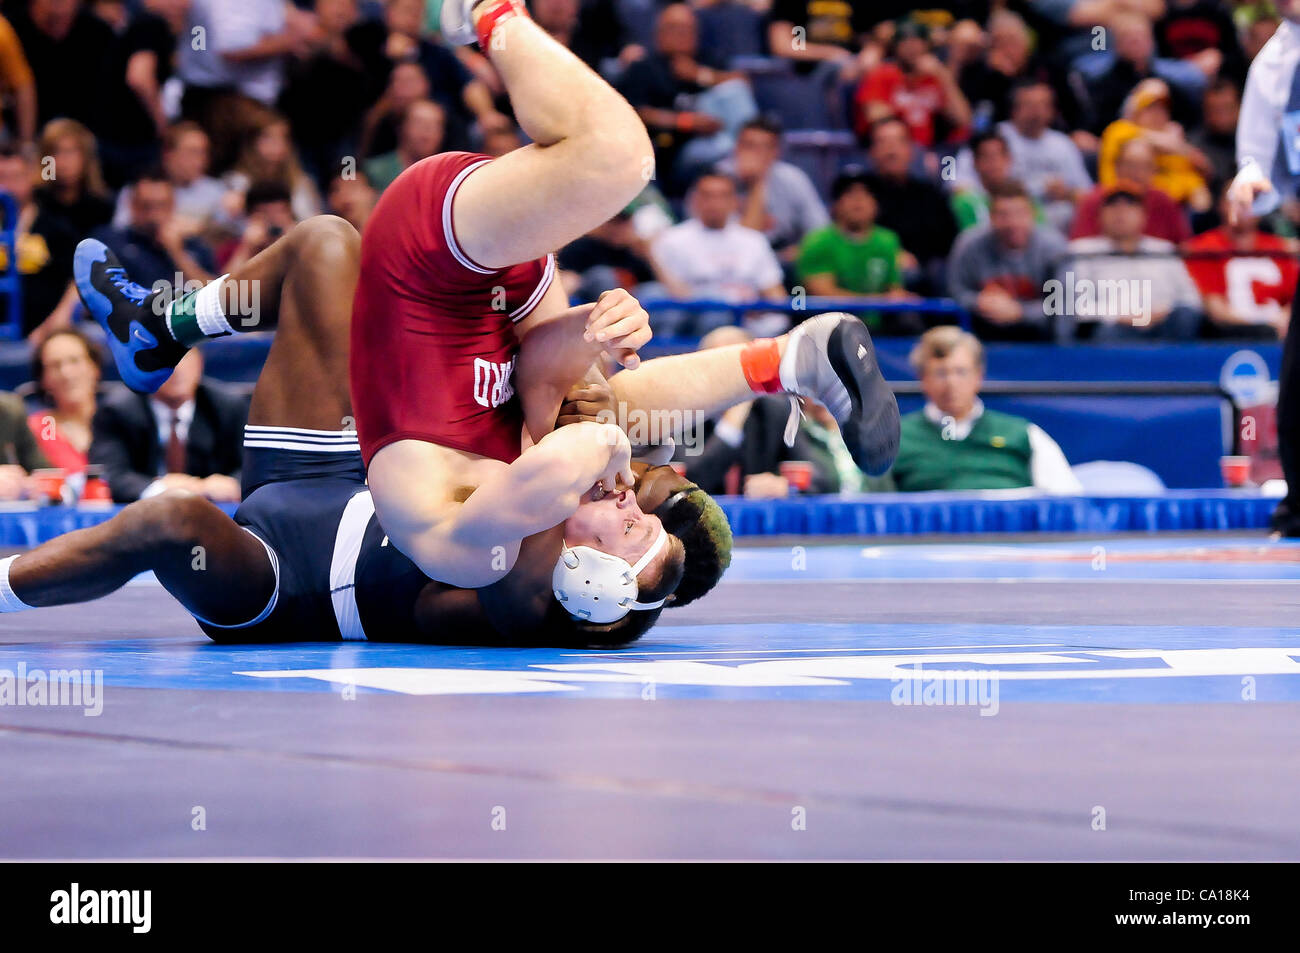 March 17, 2012 - St. Louis, Missouri, United States of America - Edward Ruth (blue) of Penn State attempts to roll Nick Amuchastegui (red) of Stanford into a pin during a championship match of the NCAA Division 1 Wrestling Championships in St. Louis, MO.  Edward Ruth won to become the NCAA Division  Stock Photo